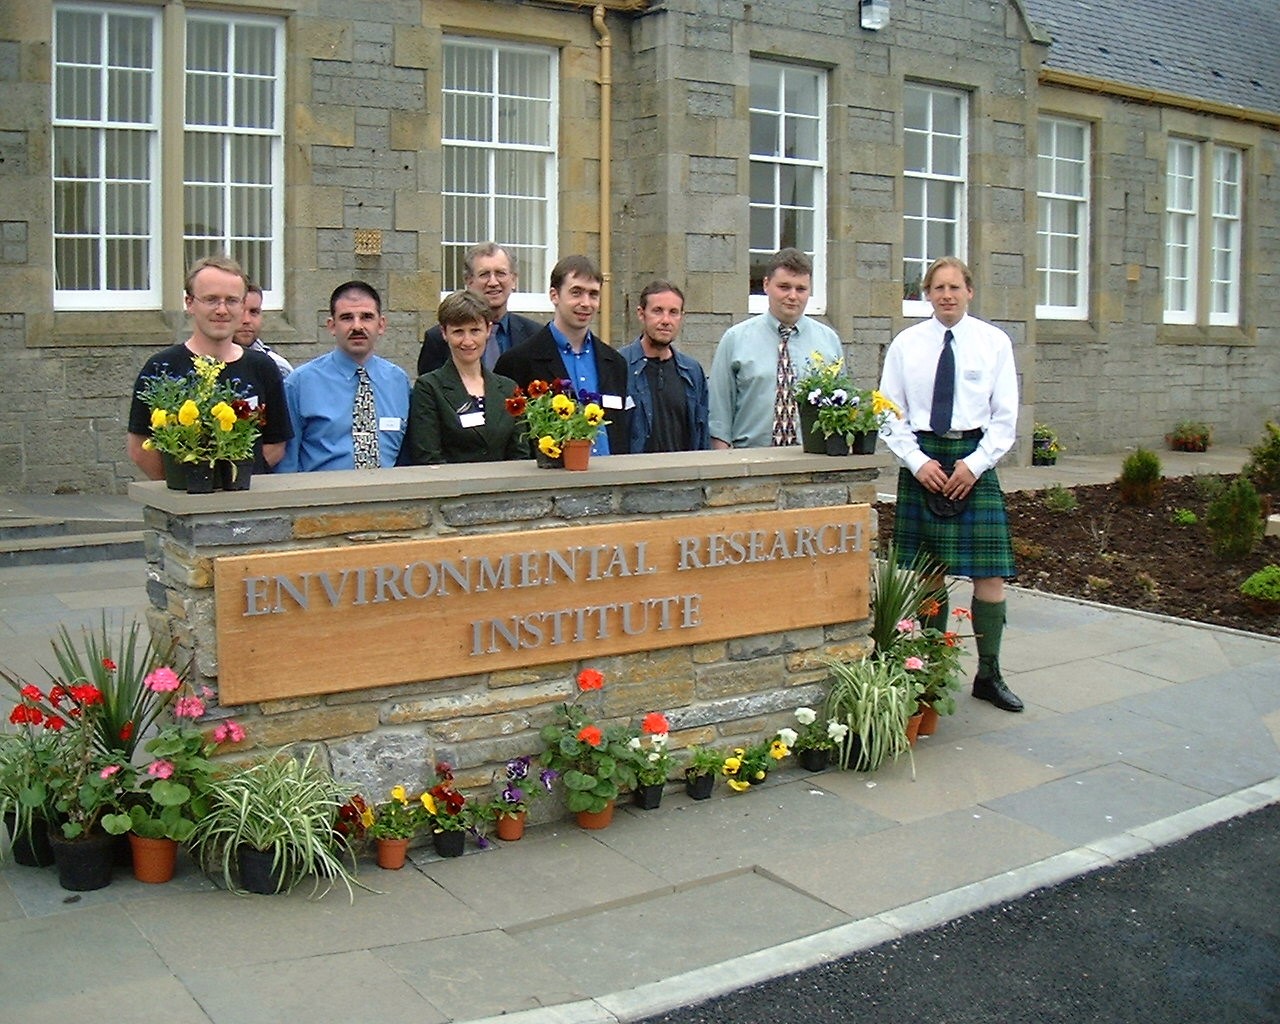 Group of people standing in front of the Environmental Research Institute sign